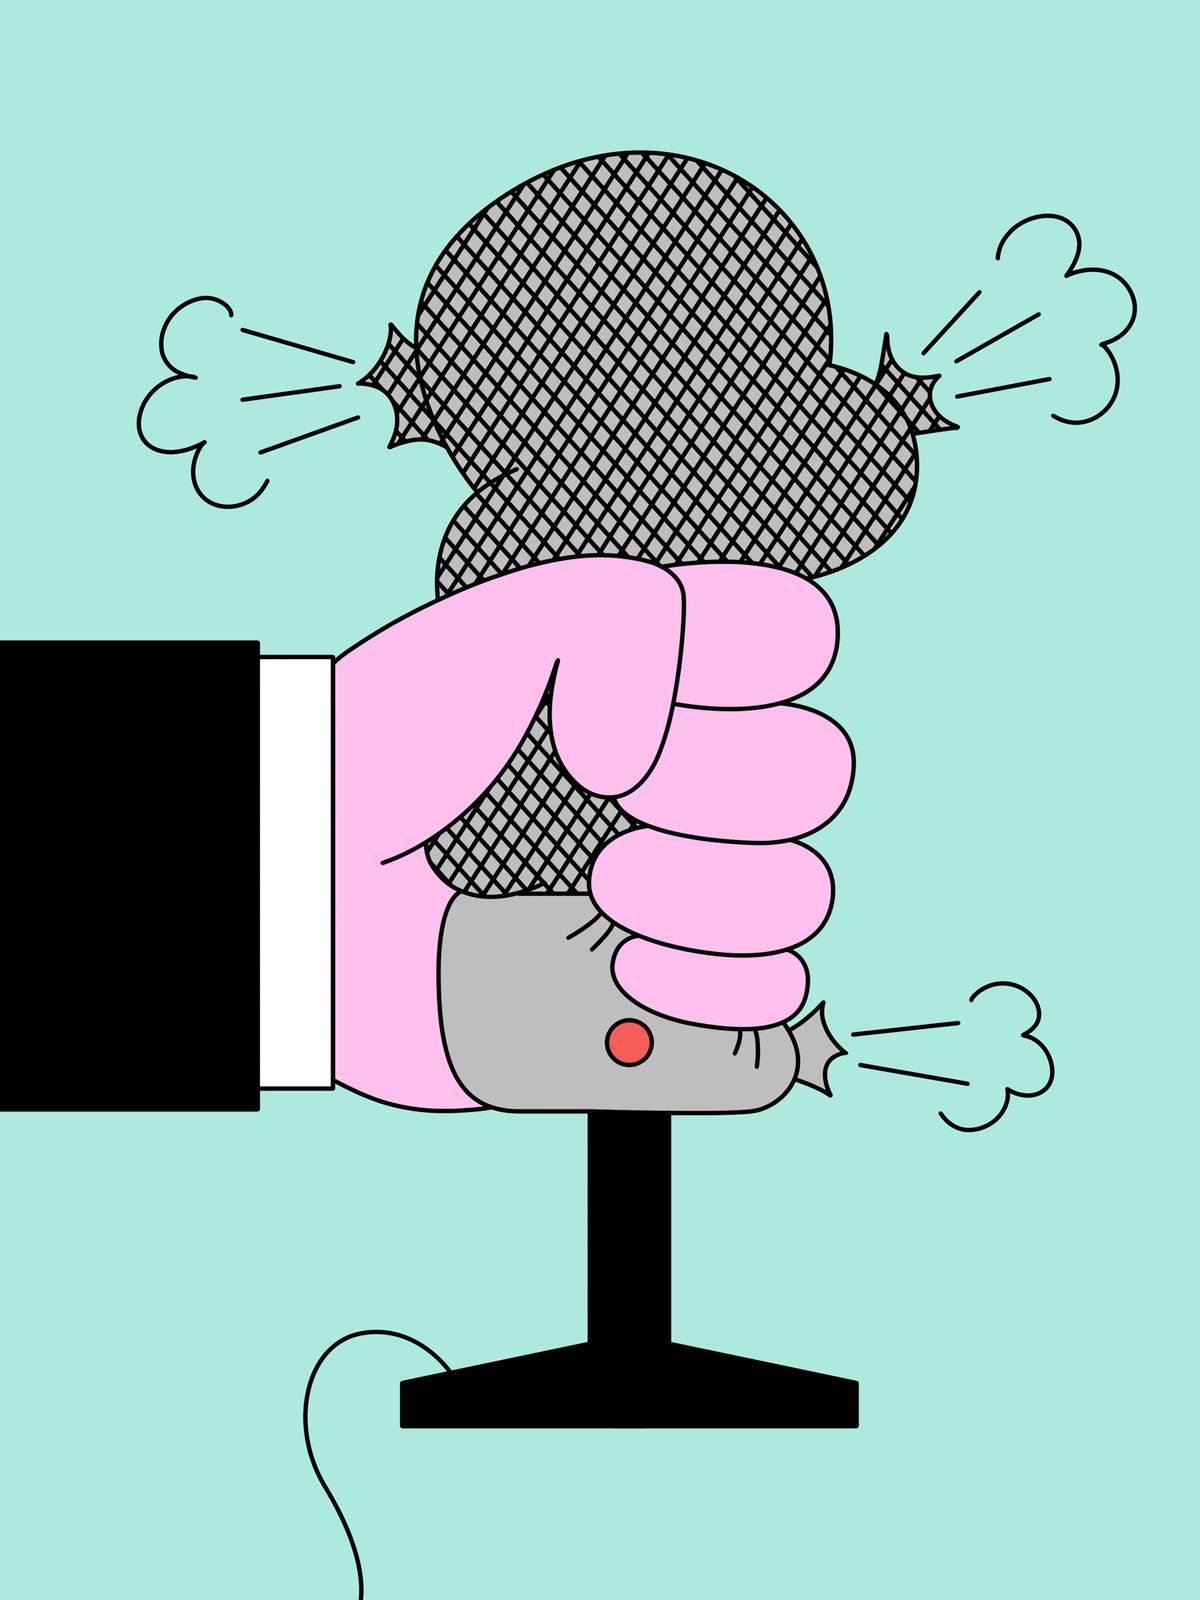 An illustration of a suited hand squeezing the air out of a microphone.